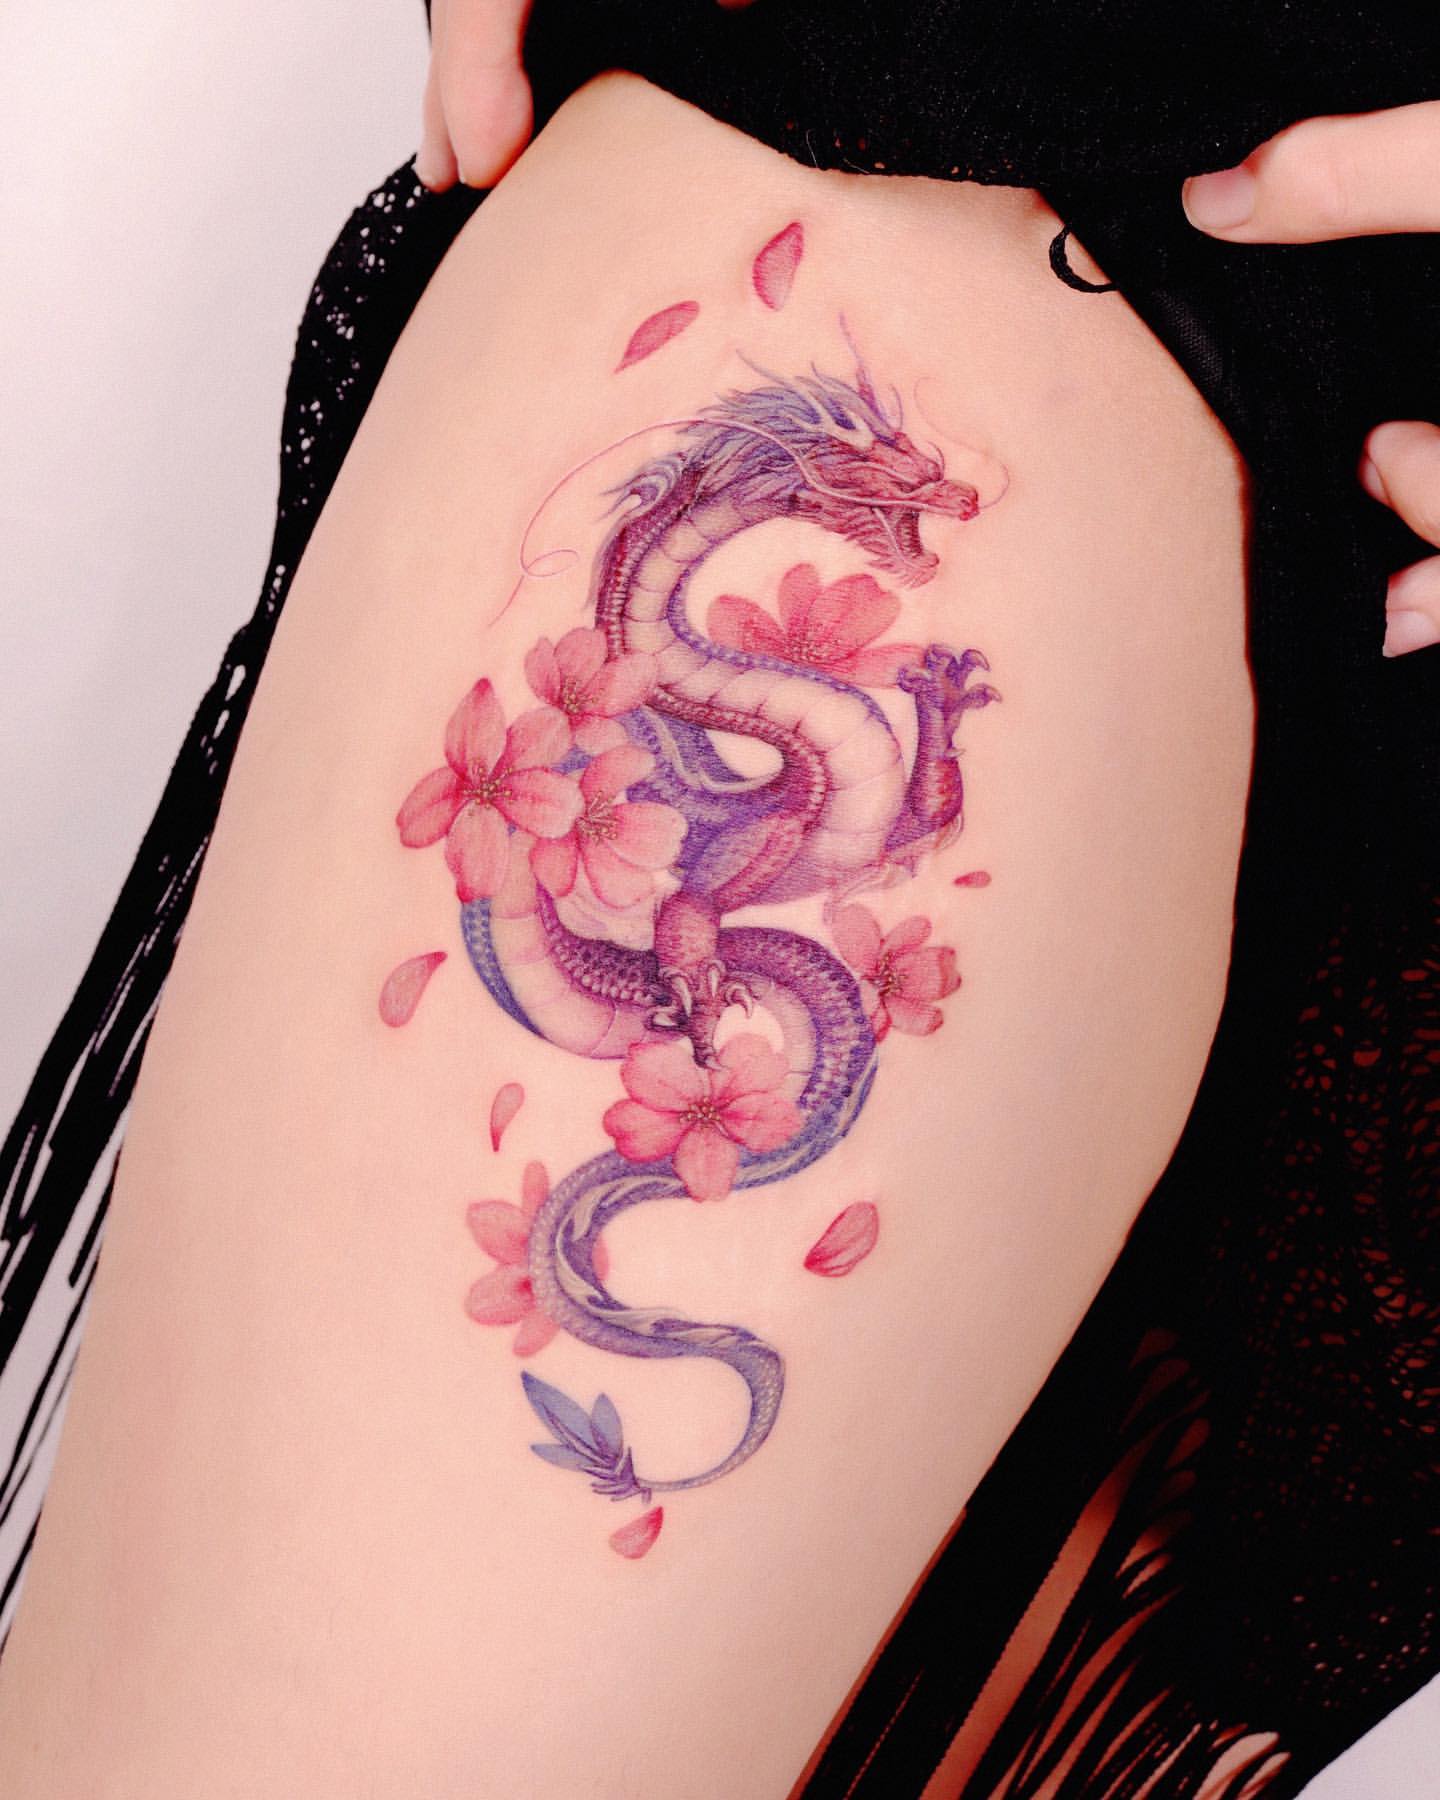 Arm Tattoos for Women 45